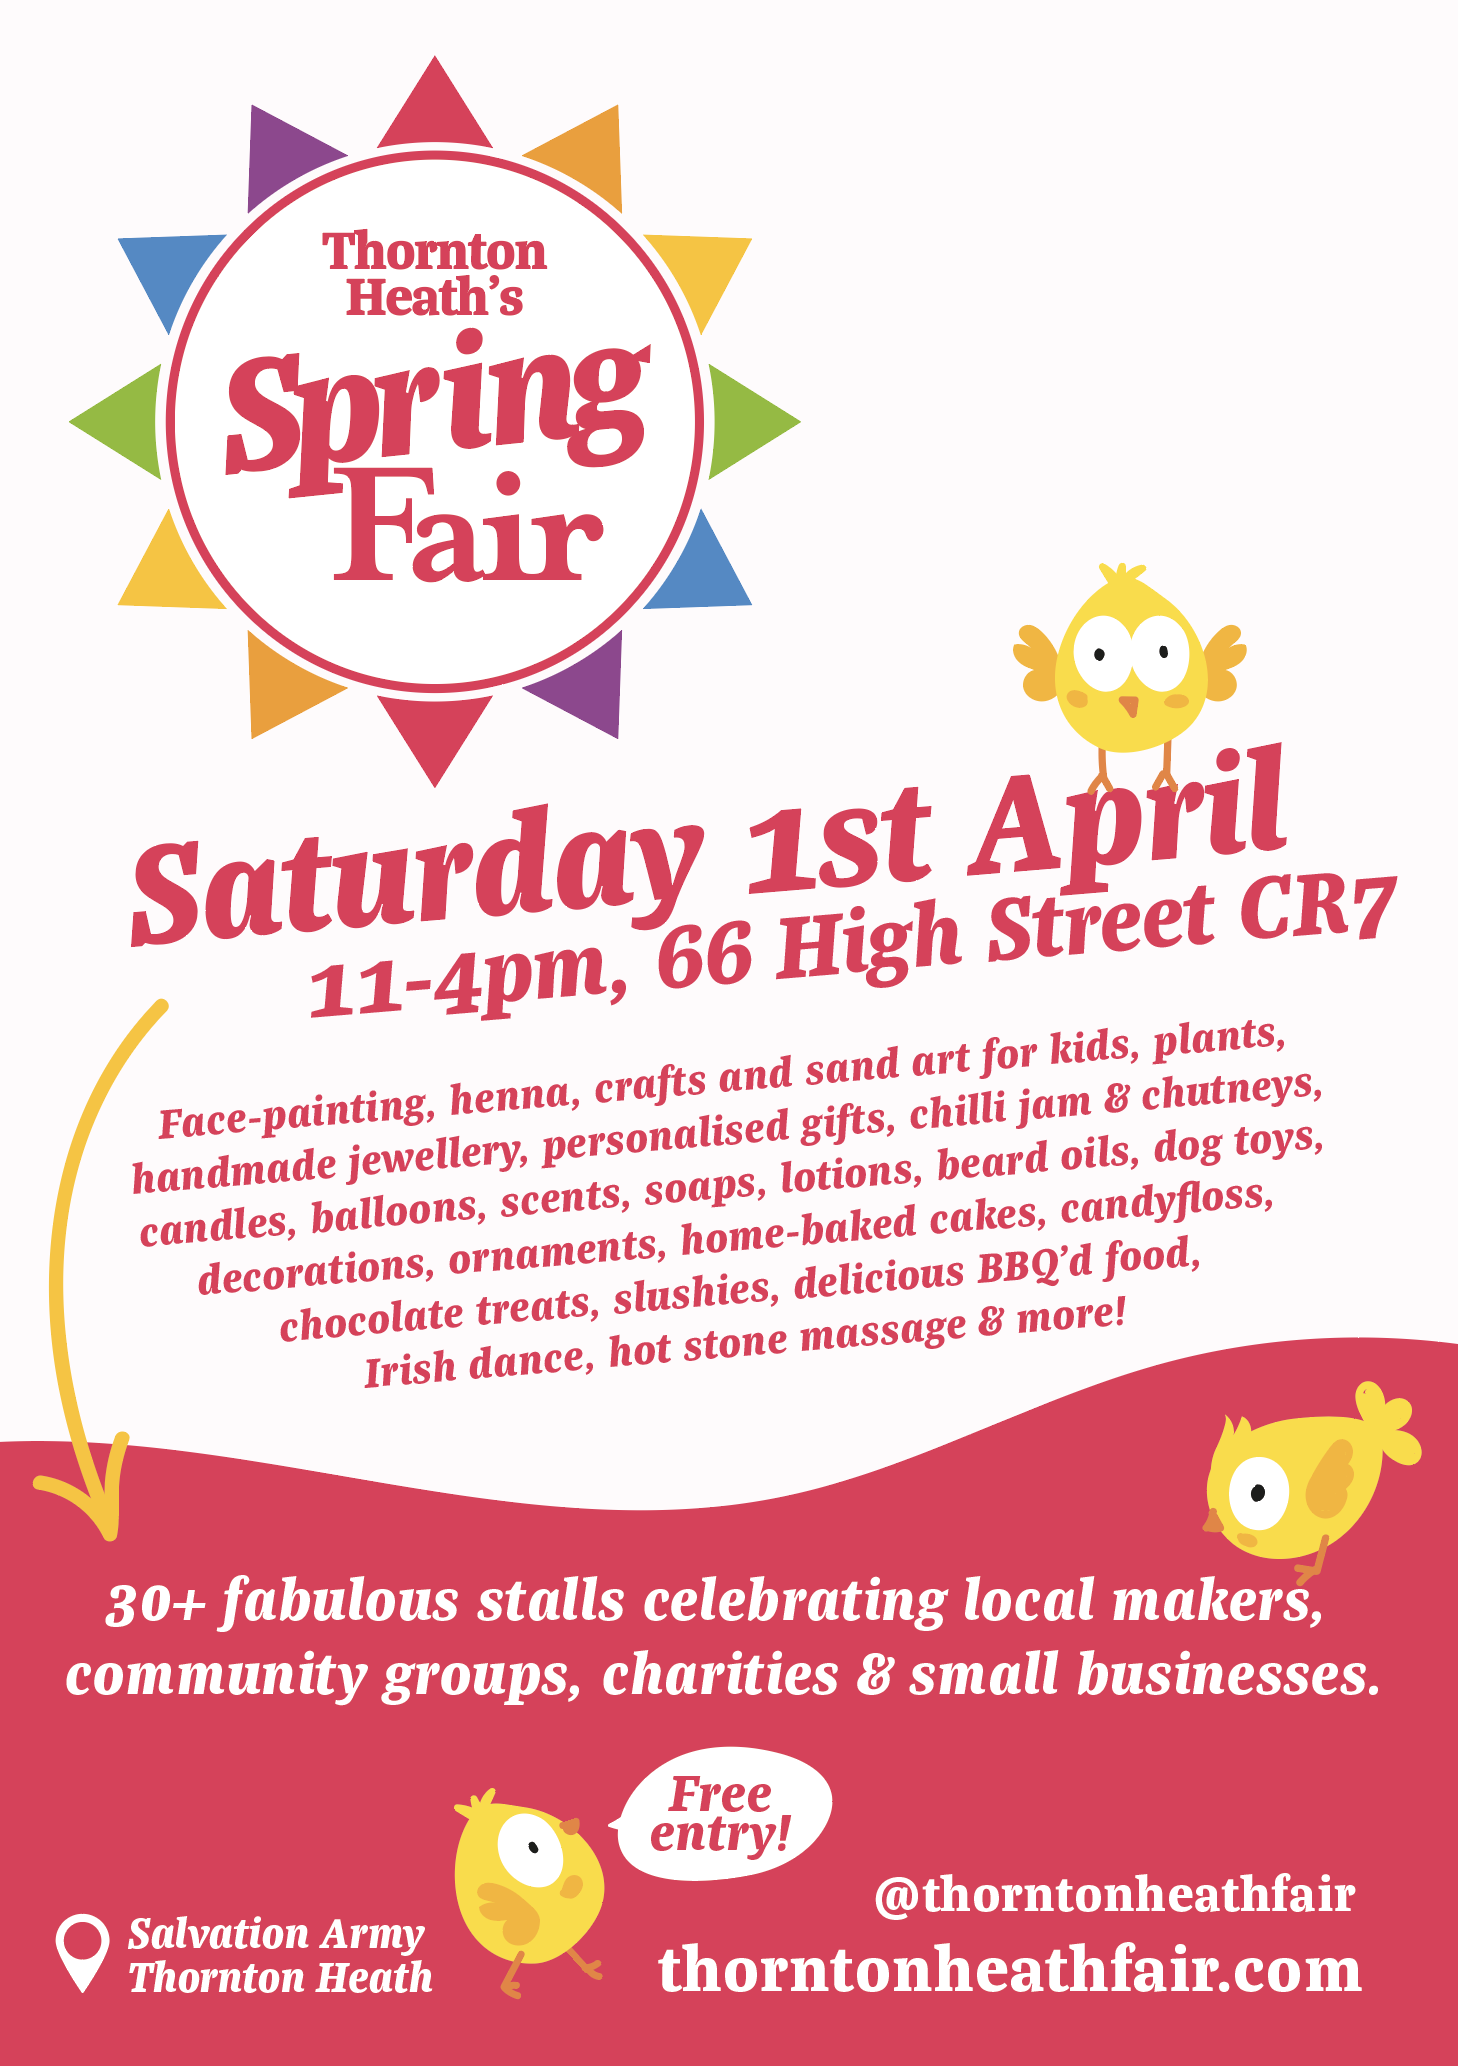 Thornton Heath Spring Fair poster for Saturday 1st April, listing all the different stall types such as face painting, henna, hot stone massage, food, local makers and small businesses